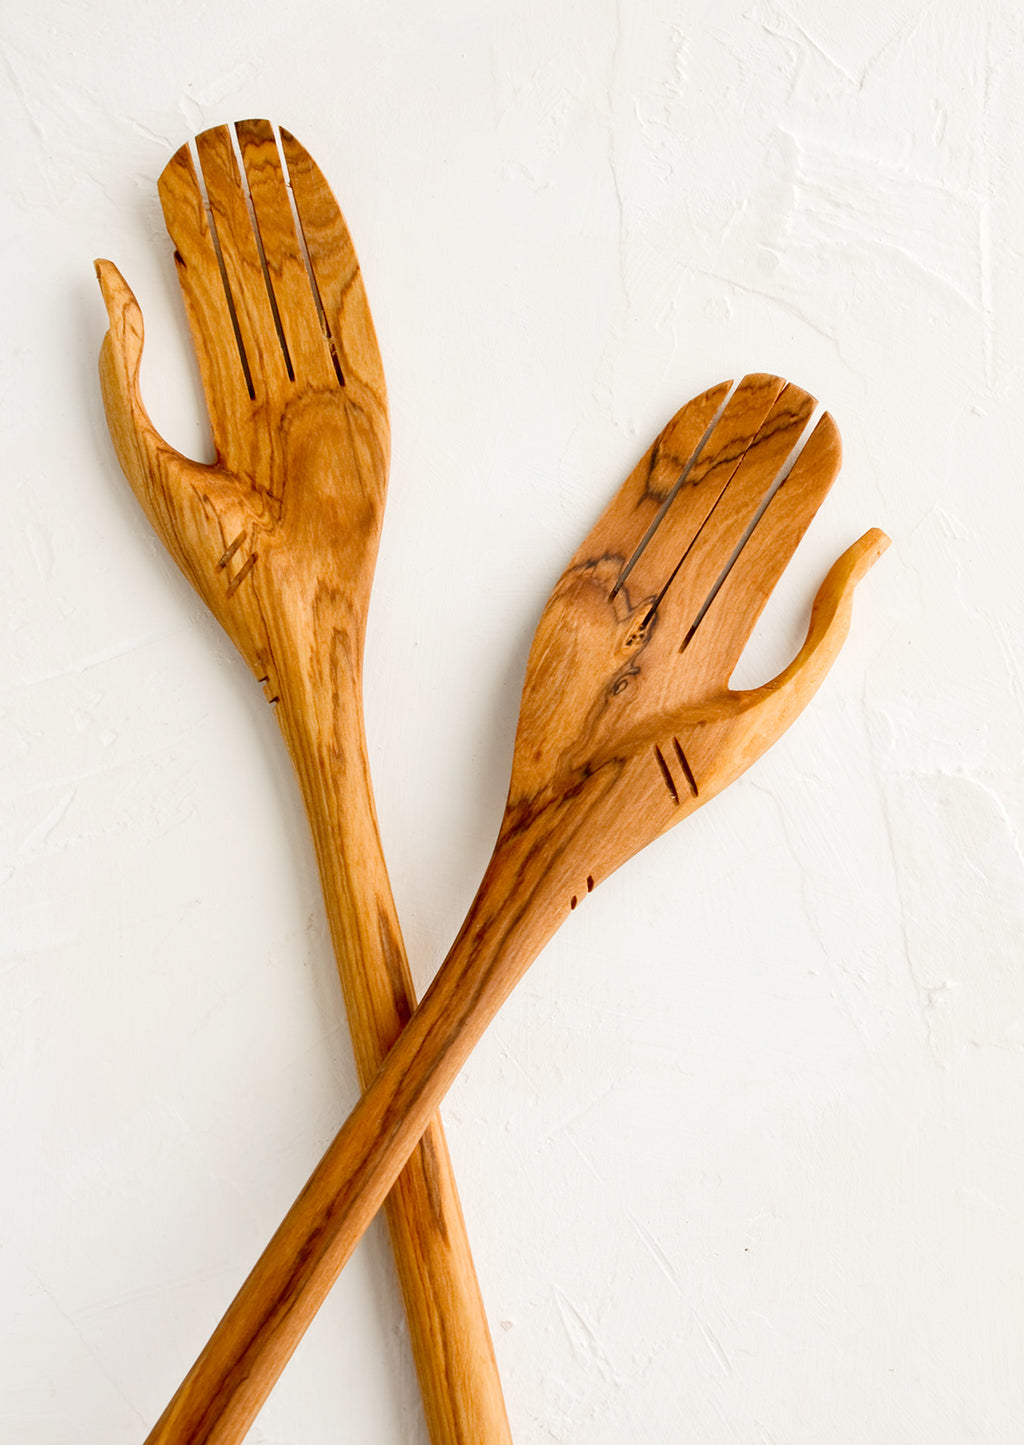 1: A pair of wooden salad servers carved in the shape of a pair of hands.